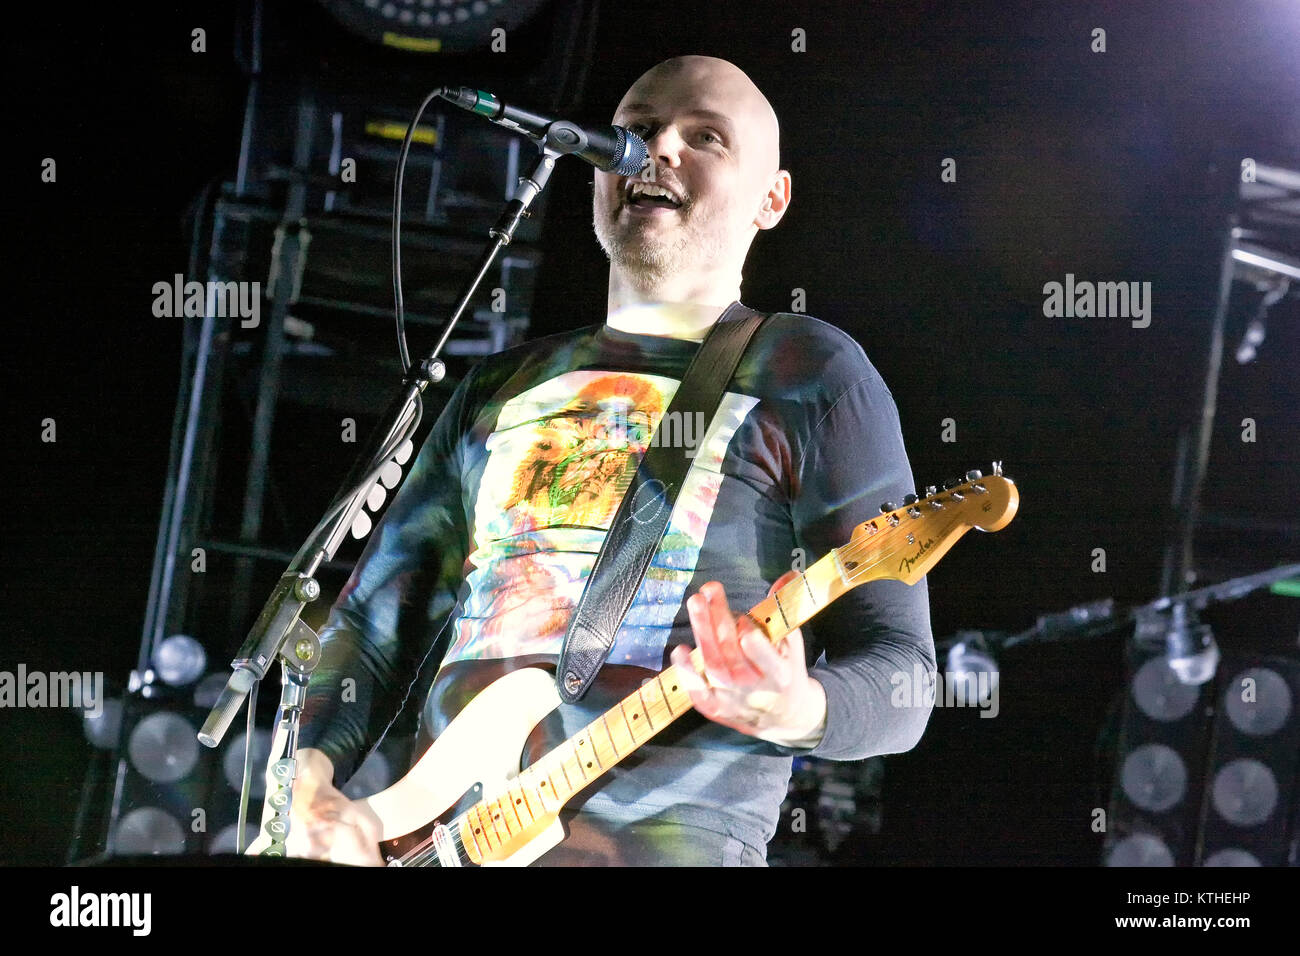 The American alternative rock band The Smashing Pumpkins performs a live concert at Oslo Spektrum. Here singer, songwriter and musician Billy Corgan is seen live on stage. Norway, 04/11 2011. Stock Photo